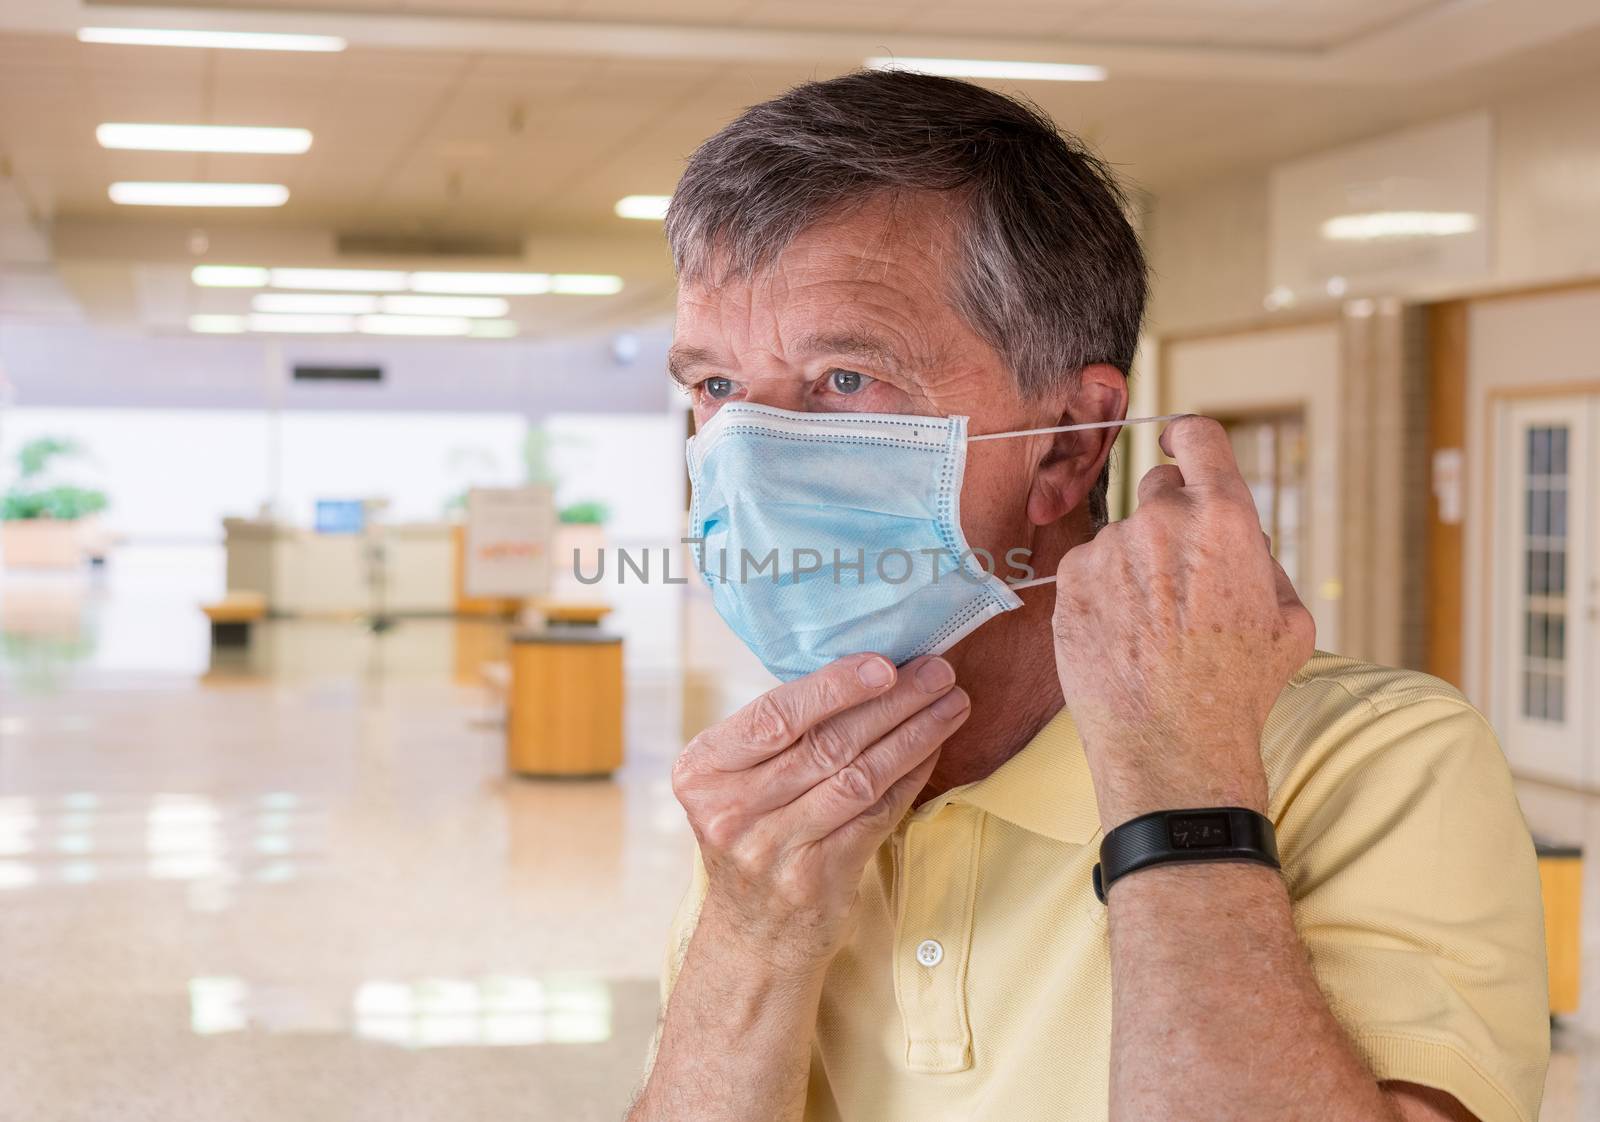 Senior caucasian man adjusting his face mask and looking concerned about coronavirus epidemic. Composite inside shopping mall